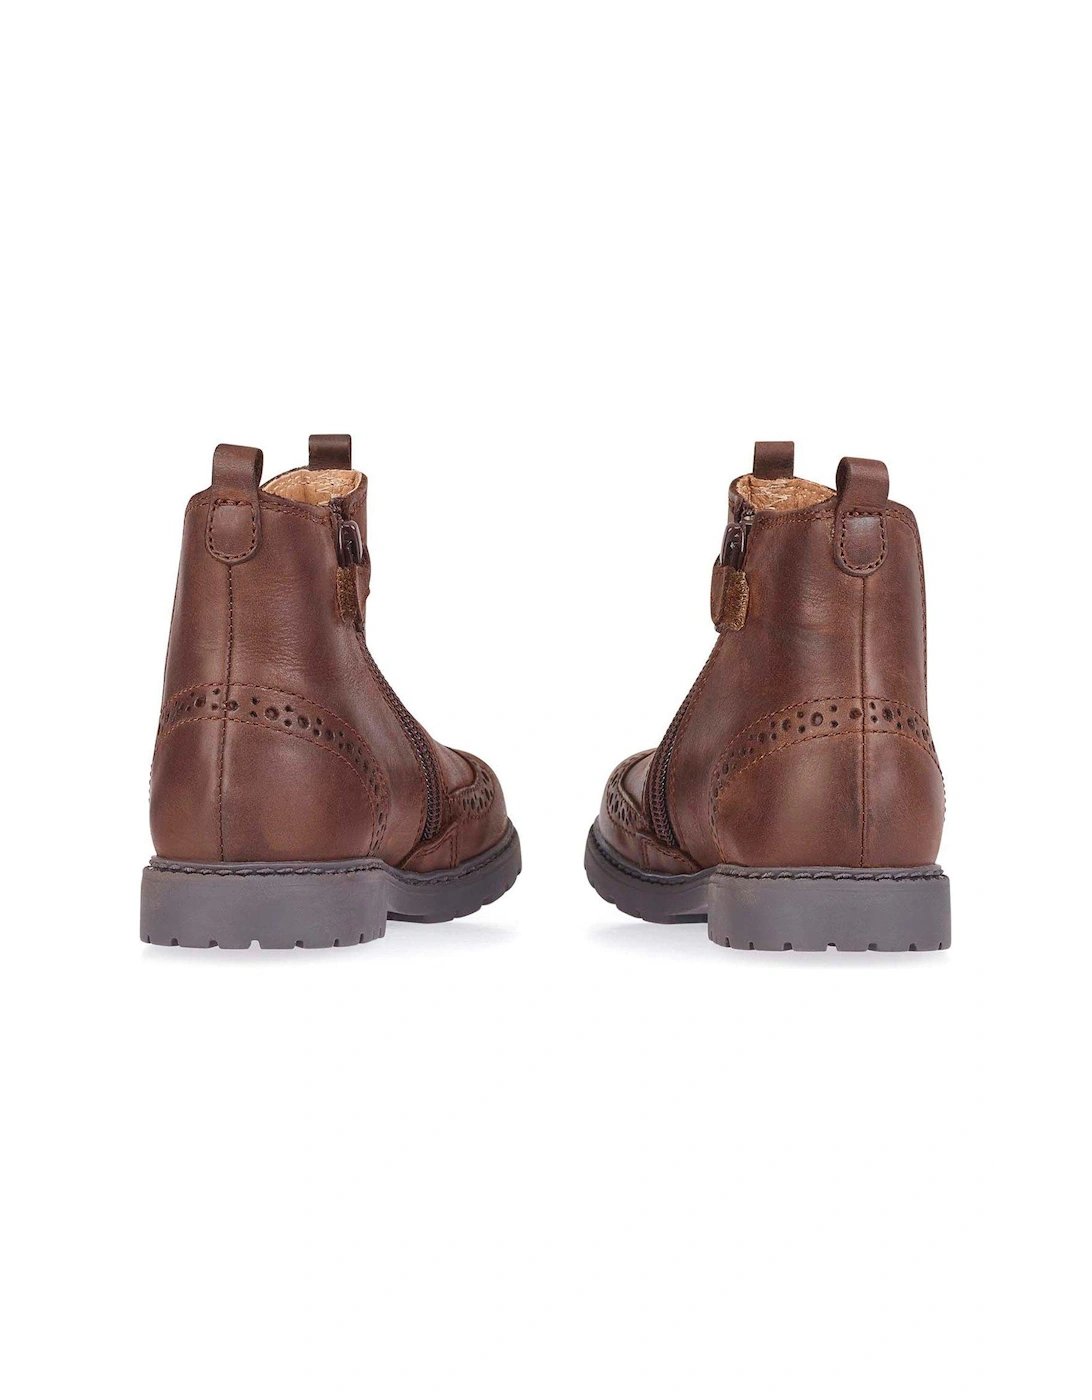 Chelsea Tan Leather Pull On Zip Up Boots - Brown